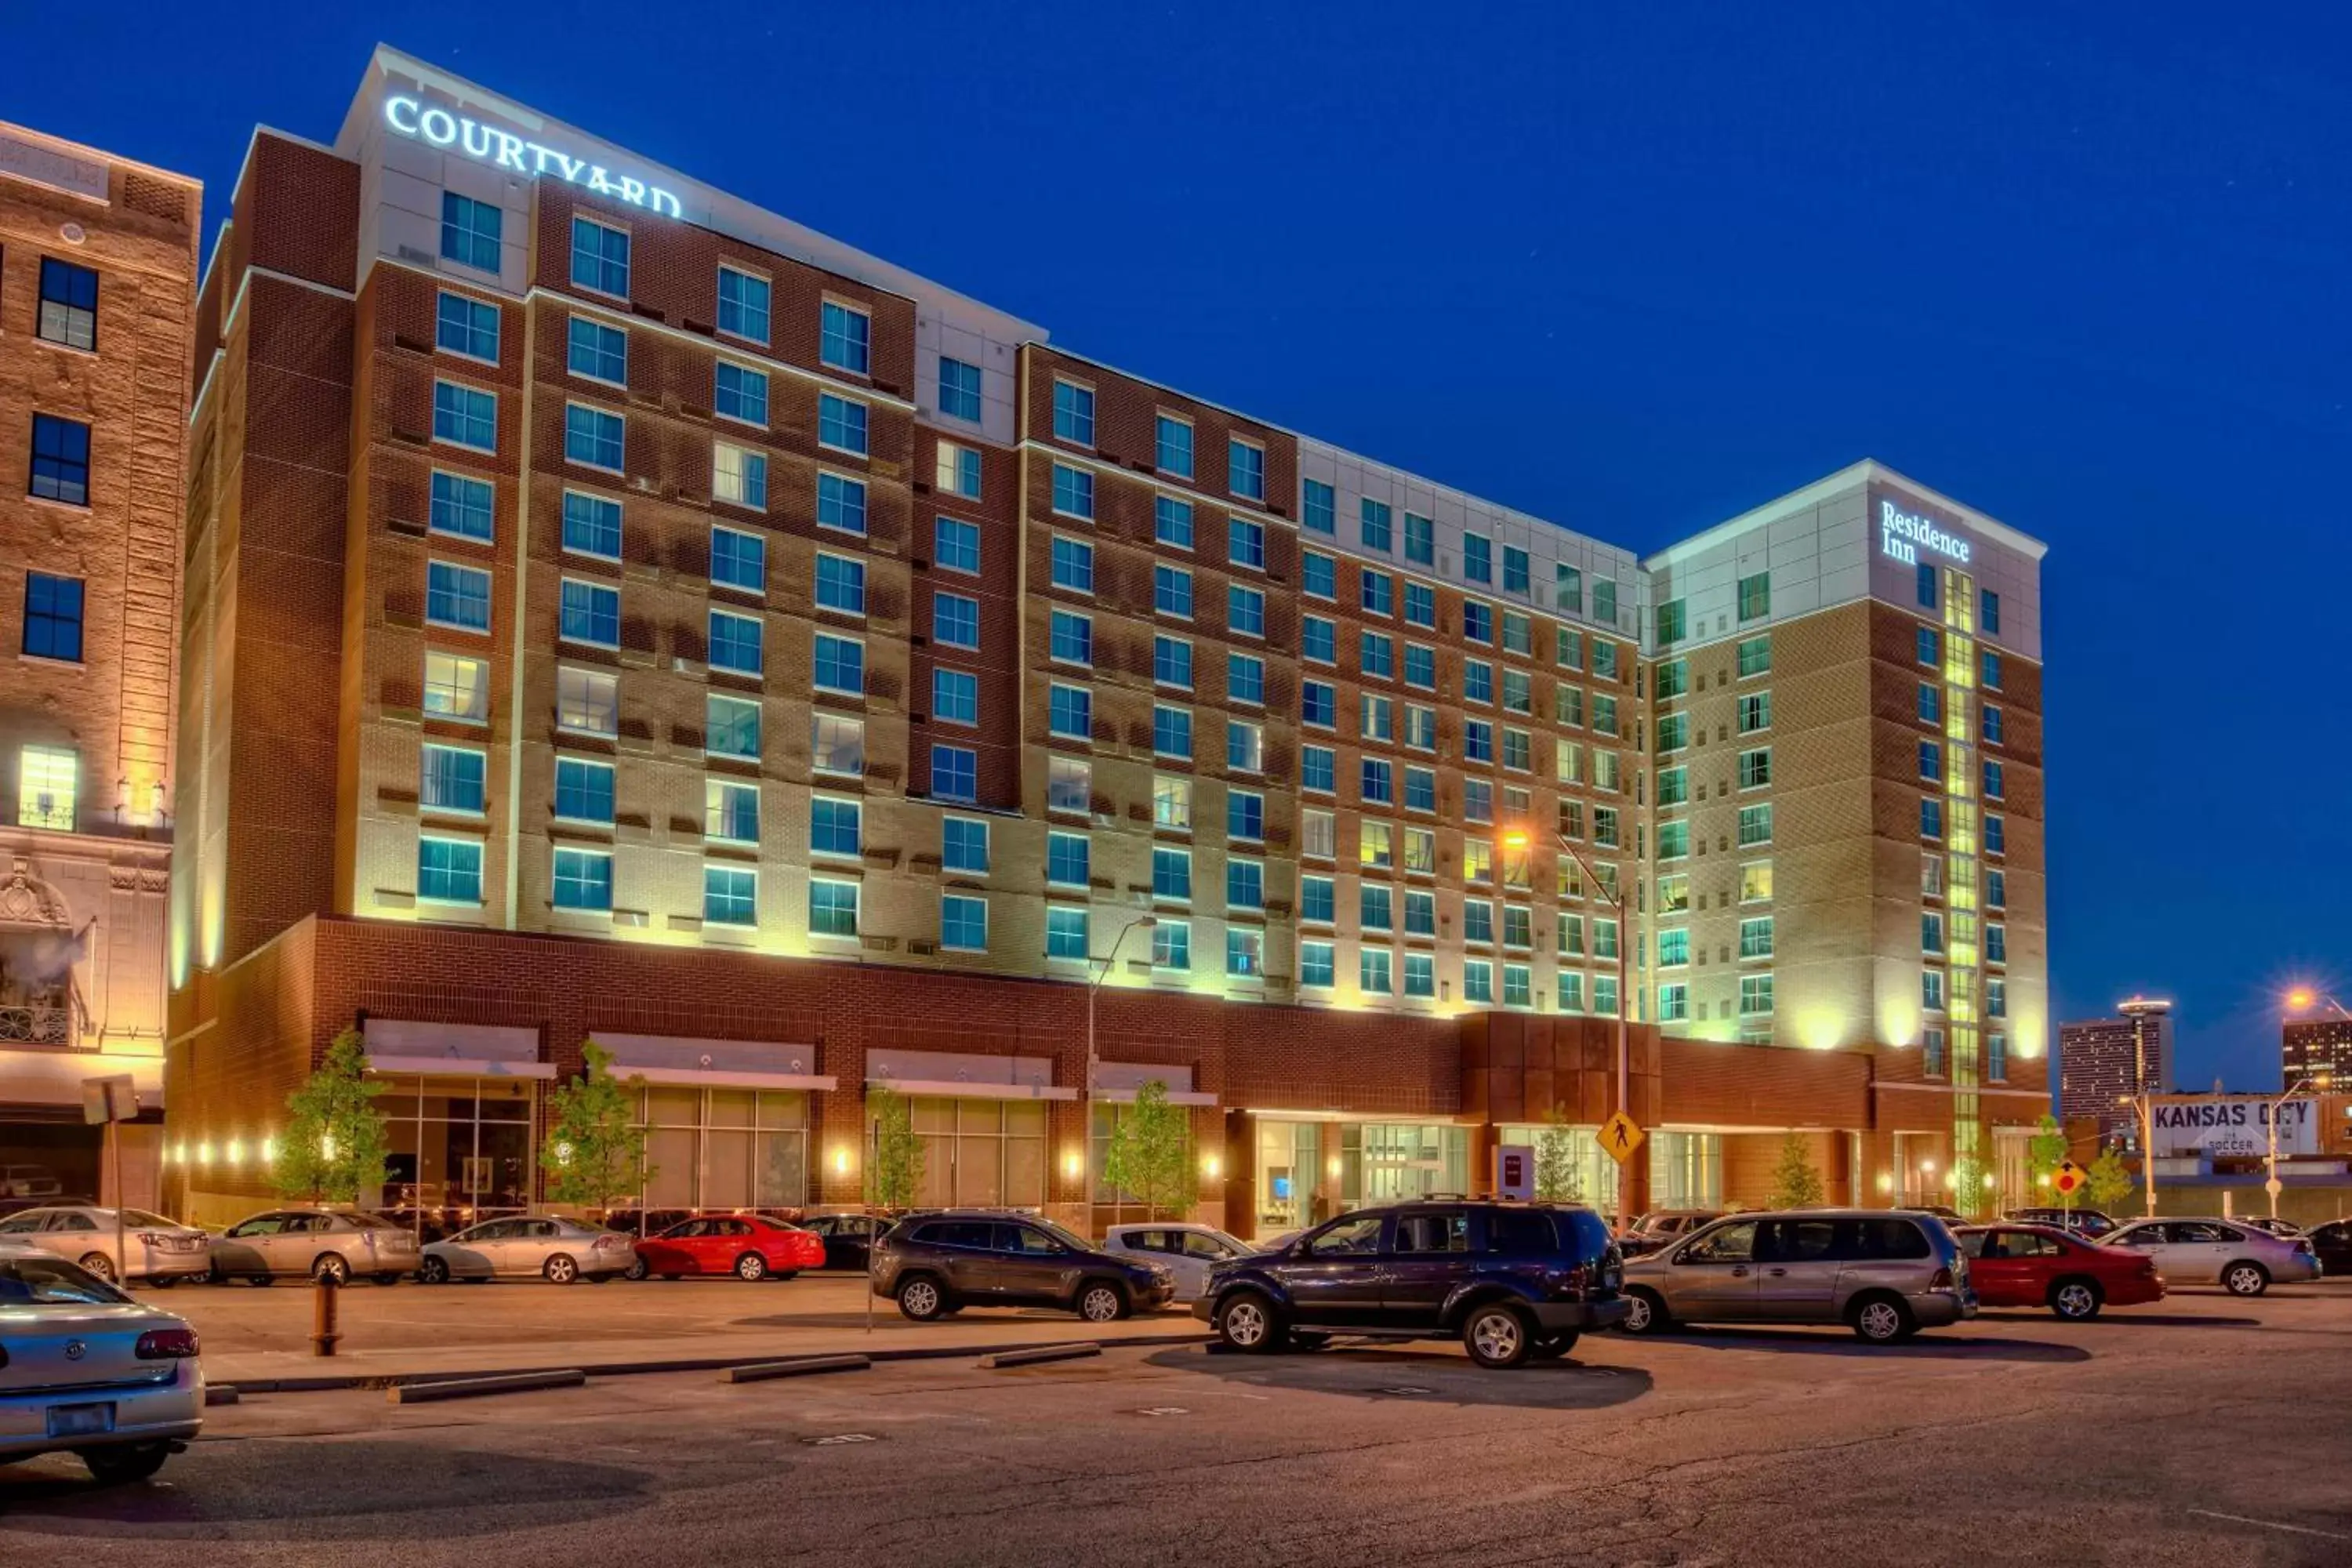 Property Building in Residence Inn by Marriott Kansas City Downtown/Convention Center